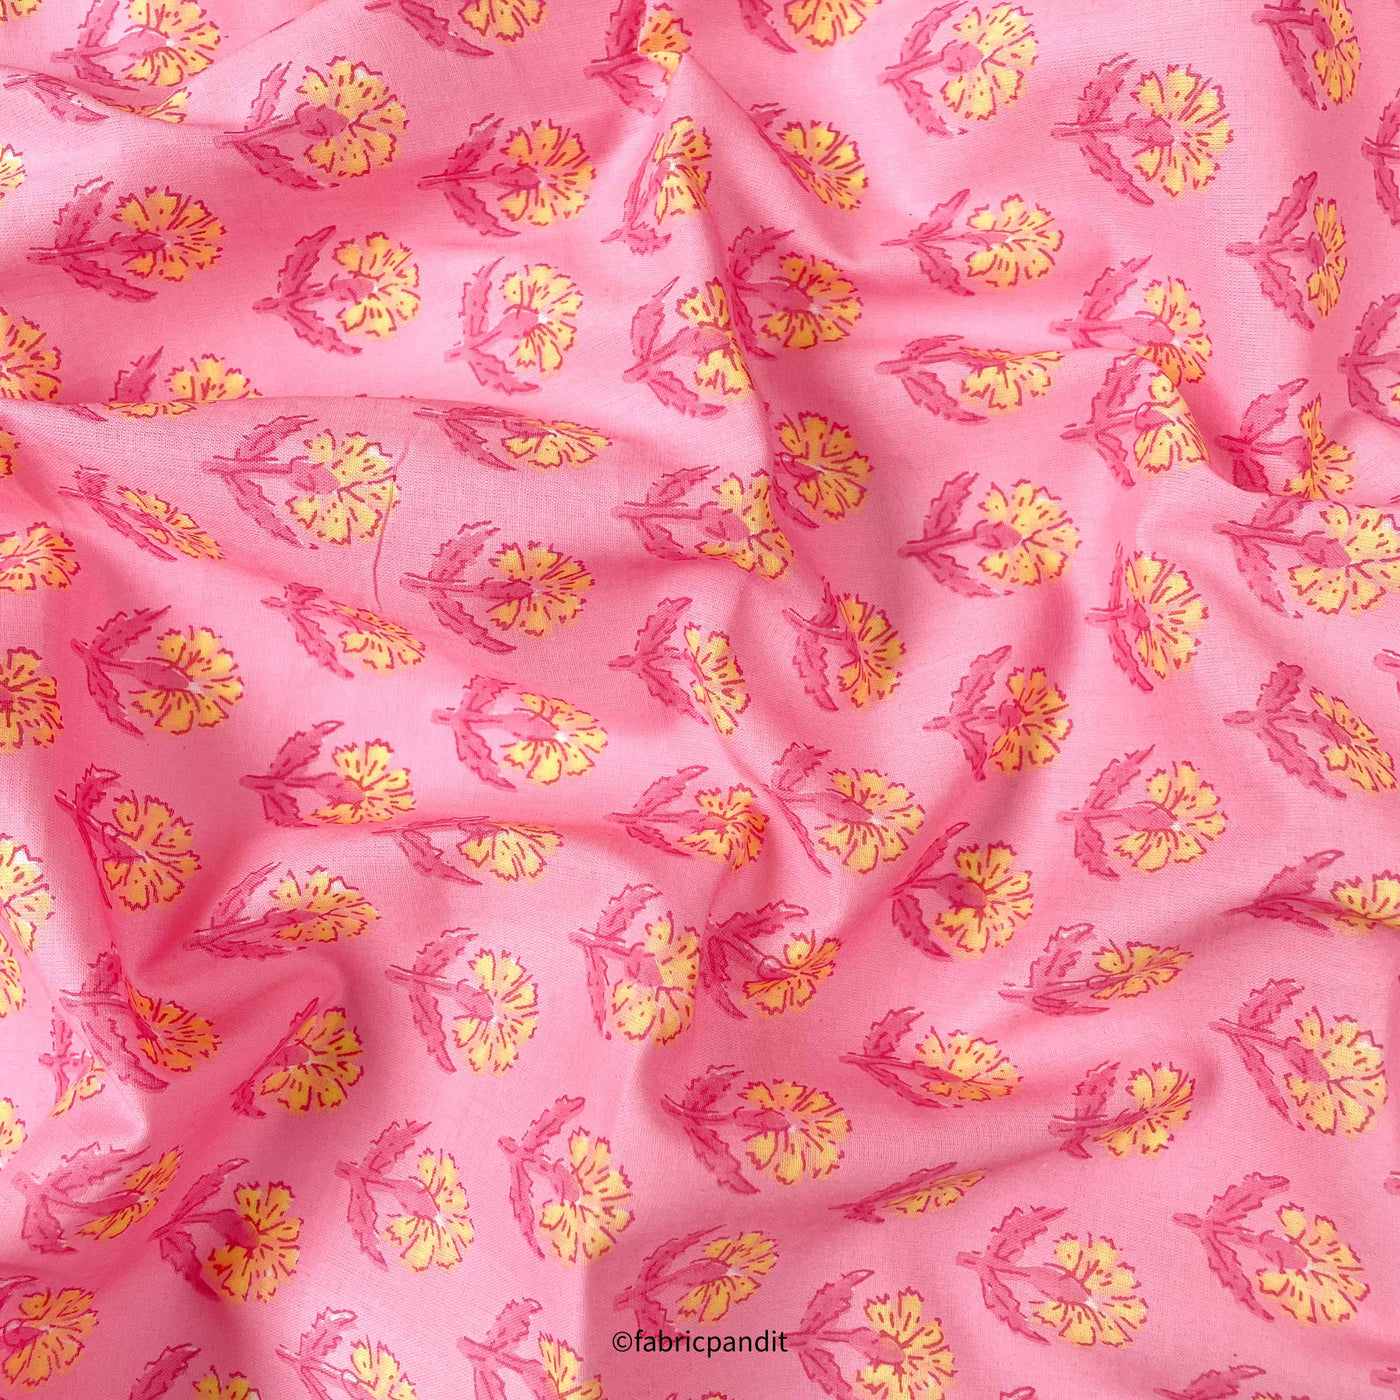 Hand Block Printed Cotton Fabric Cut Piece (CUT PIECE) Blush Pink & Yellow Mini Lilies Hand Block Printed Pure Cotton Modal Fabric (Width 42 inches)